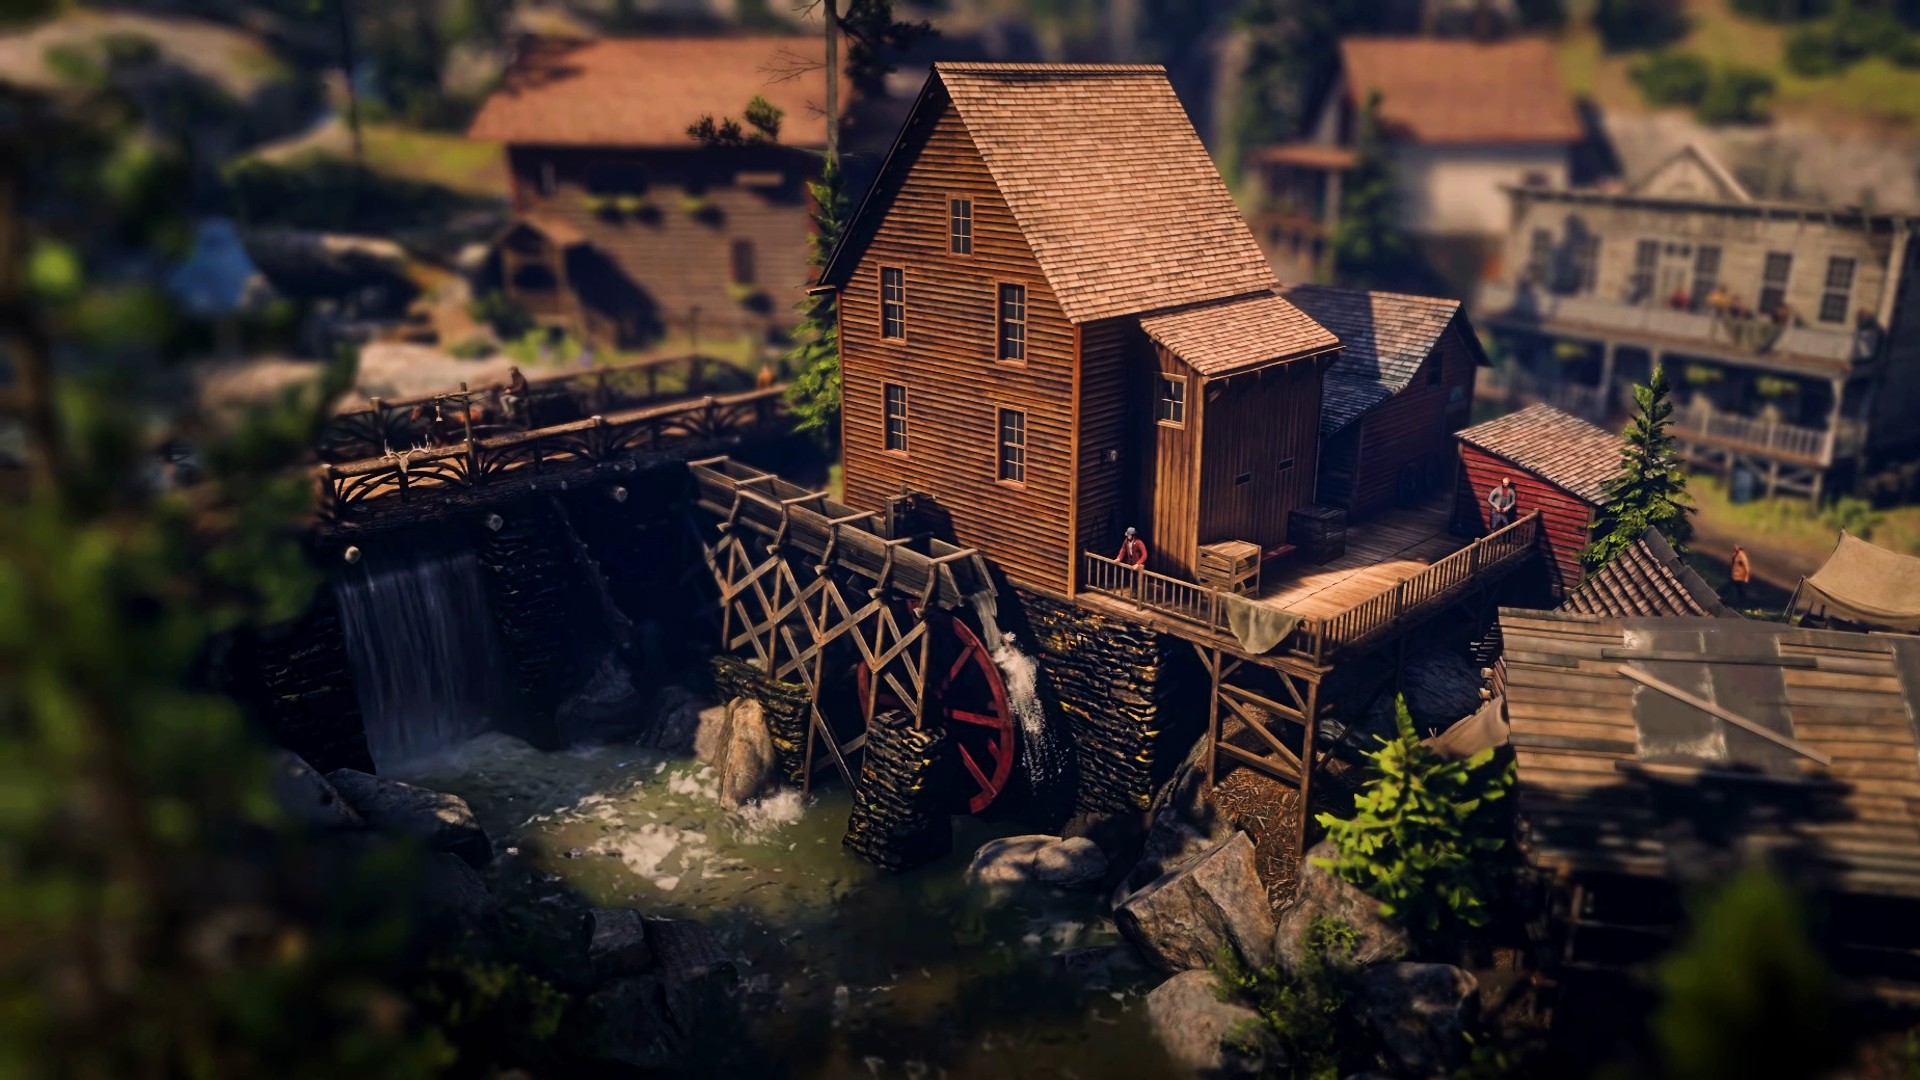 Fan turns Red Dead Redemption 2 into wholesome miniature world